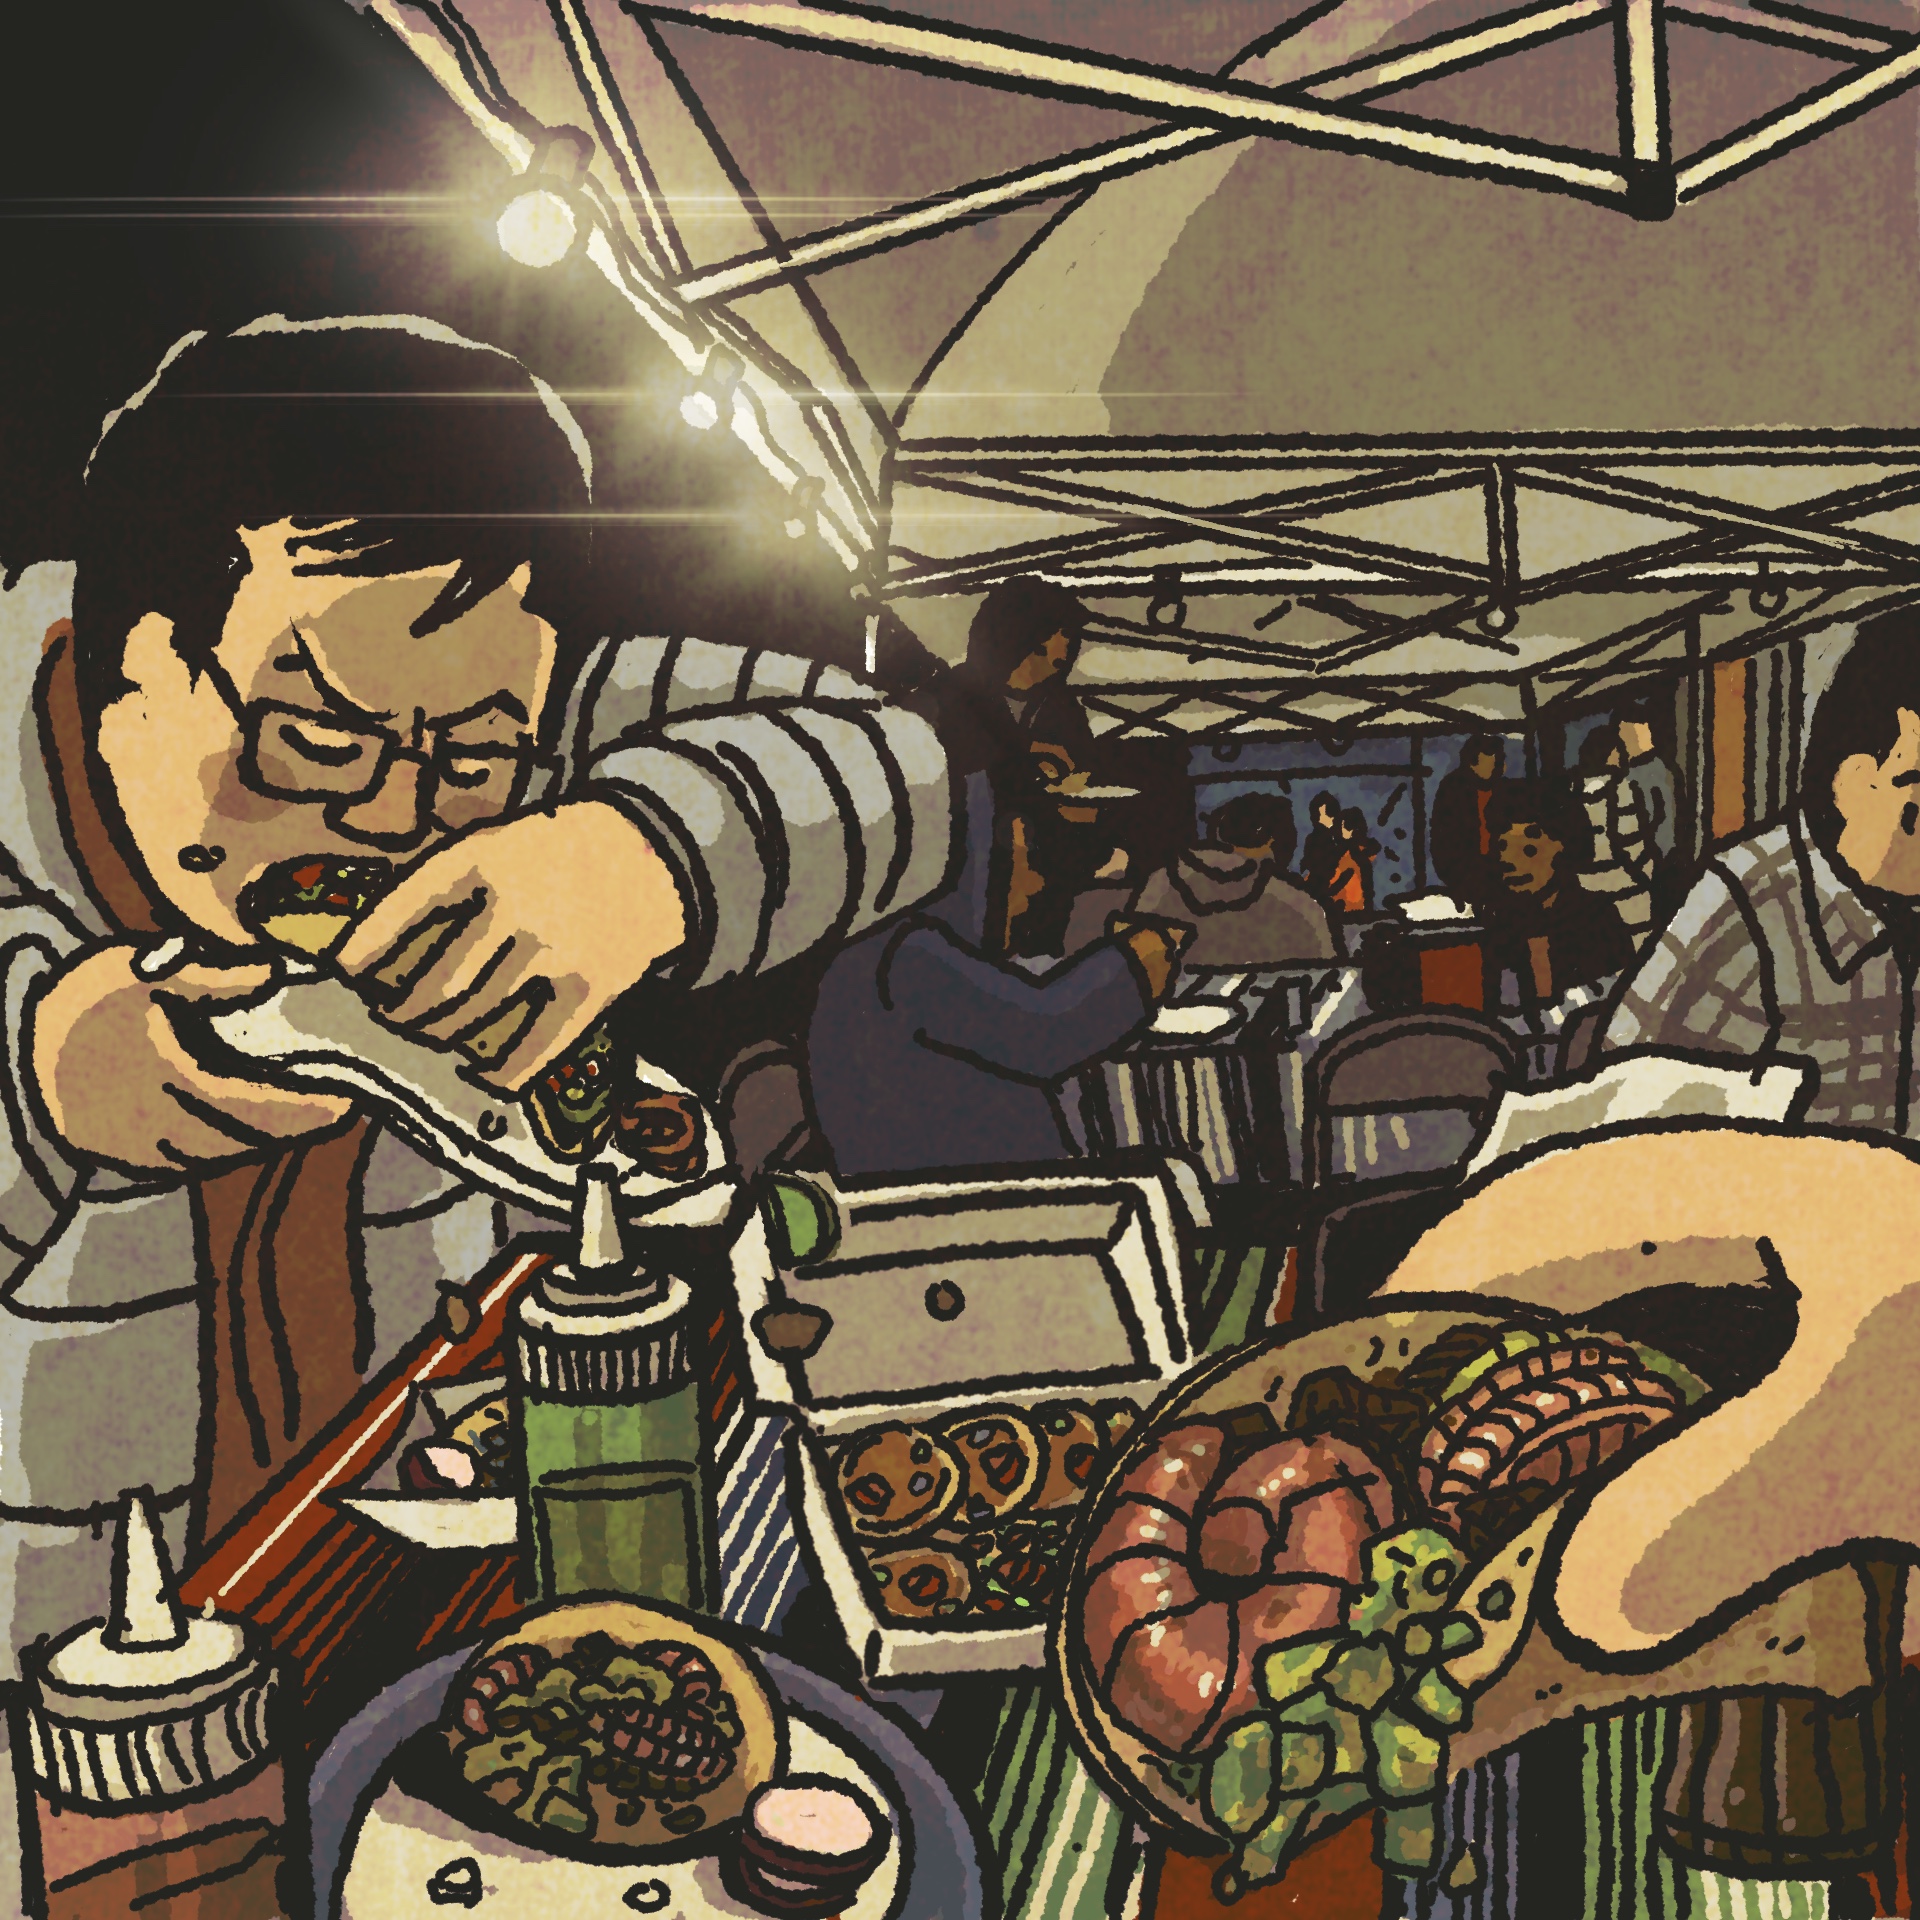 Illustration: In a tented dining area, a man holds a large shrimp taco while his companion stuffs a huarache into his mouth.